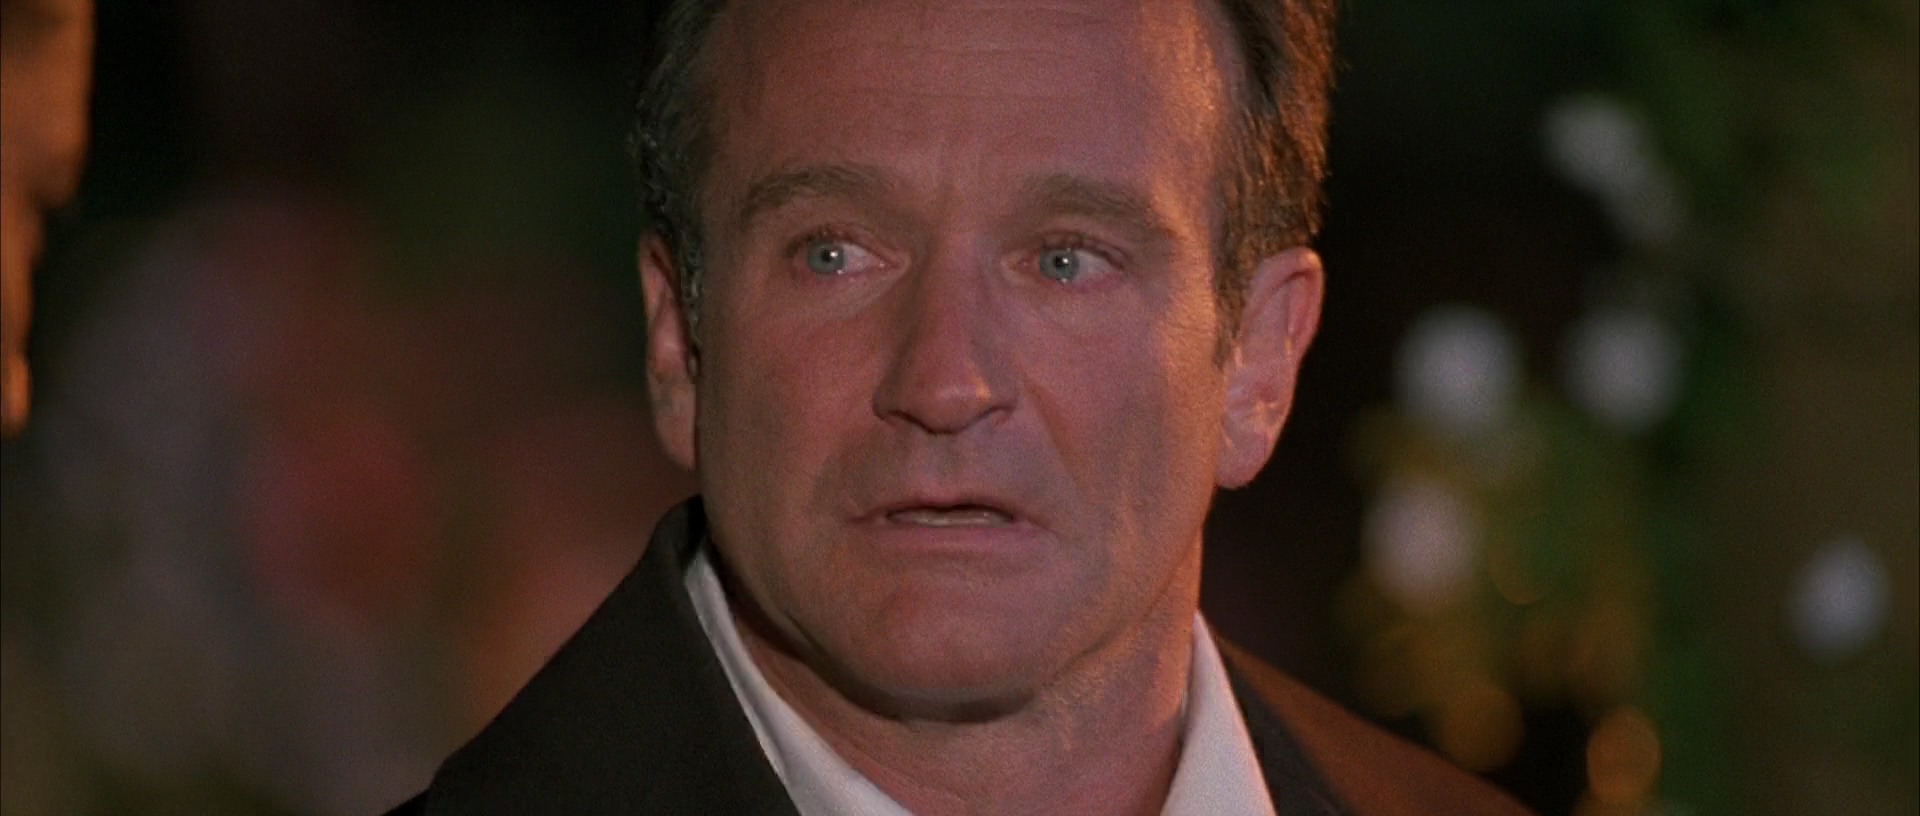 Robin Williams in What Dreams May Come